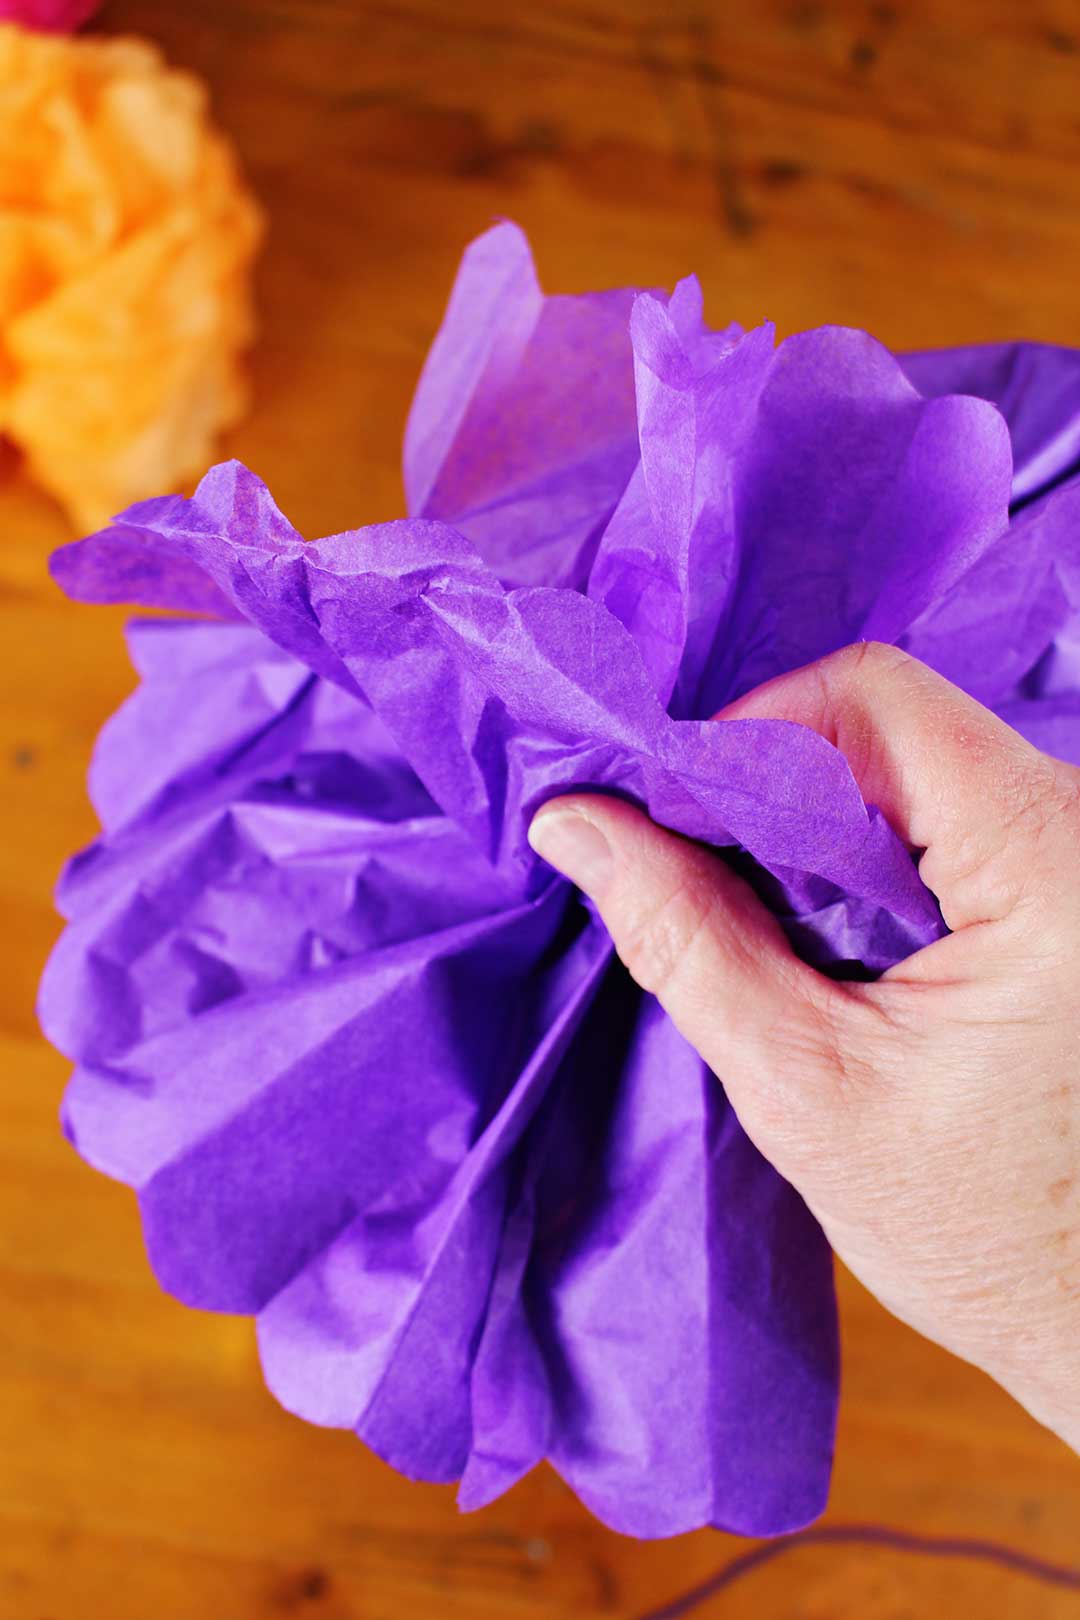 Hand fanning out and fluffing purple tissue paper flower.